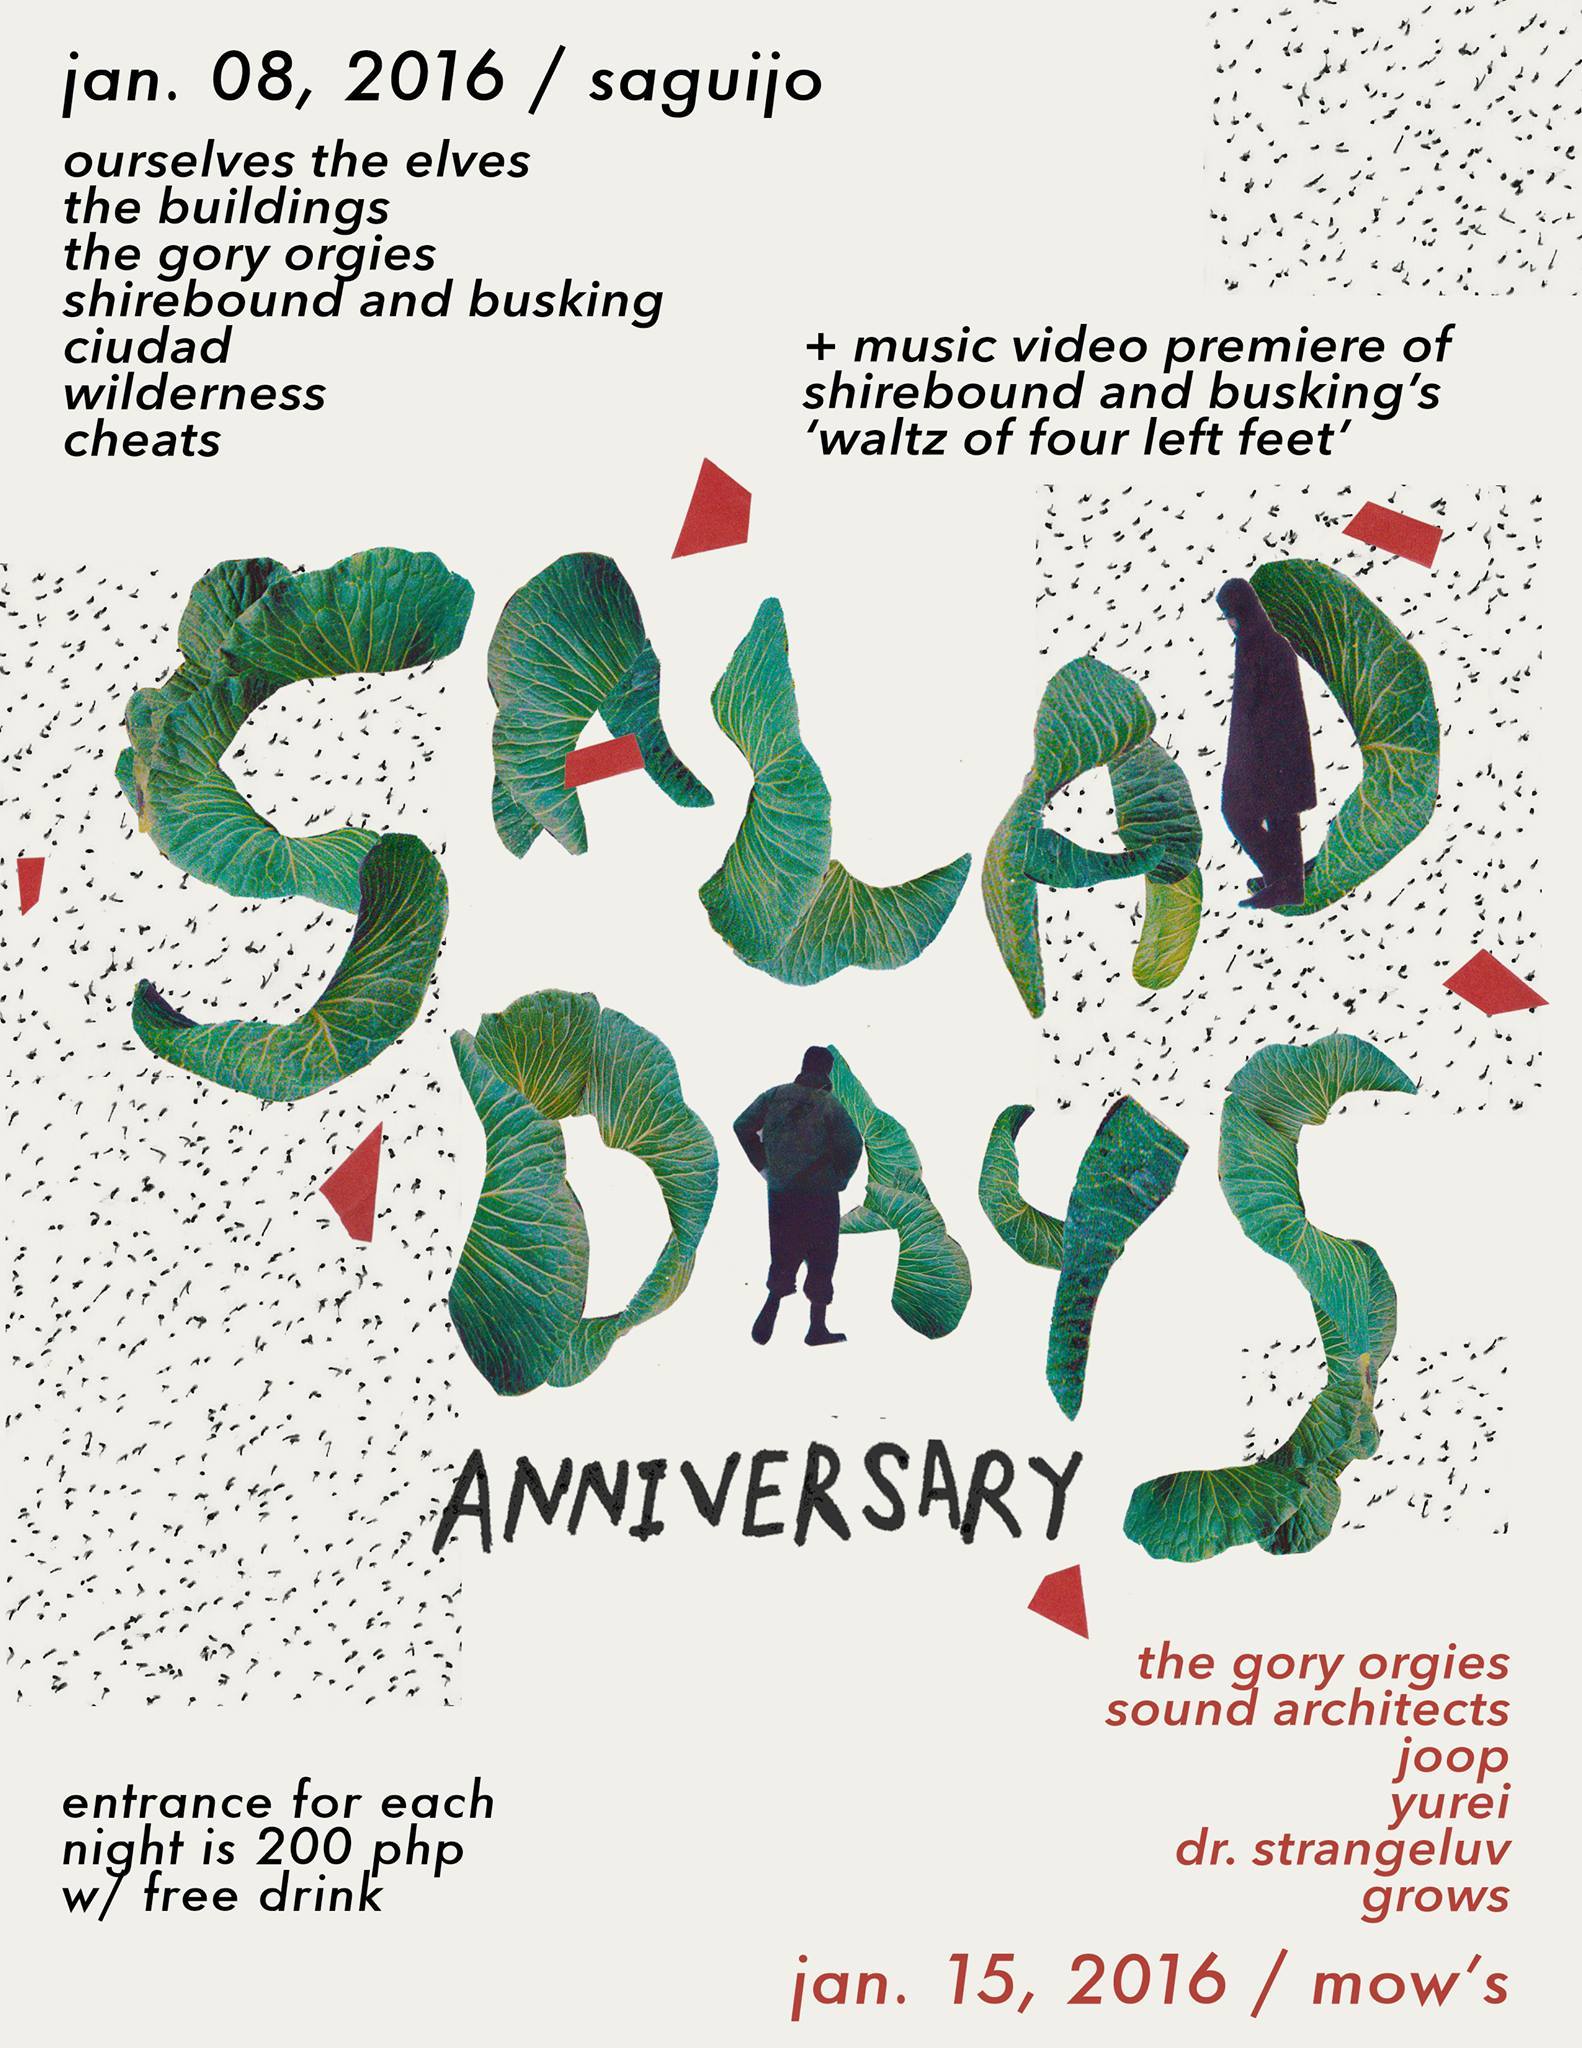 SALAD DAYS ANNIVERSARY PARTYYY!: January 8 ("Waltz of Four Left Feet" music video launch) + January 15 clock January 8 - January 15 Jan 8 at 9 AM to Jan 15 at 9 AM in UTC+08 pin Show Map saGuijo Cafe + Bar Events 7612 Guijo Street, San Antonio Village, 1203 Makati, Philippines SALAD DAYS IS TURNING 1 AND WE'RE THROWIN ONE HELL OF A PARTY (OR TWO)~ 2015 has been a hell of a year! When we put up the first Salad Days at Mow's last January, we knew that something good just began, but we didn't think we'd make it this far. 2015 has been a year of learning and figuring out how to put up gig prods each month, which was a lot of hard work that paid off every time people would show up to our gigs, watch the bands, dance, and listen to the music. Last November, IDIOTERNE INC. was launched, too! It's been an eventful year, so we want to invite ya to come and celebrate a year of gigs with us, and another year of music and gigs to come! #SalakayinAngDaigdig2016 --- NIGHT 1 January 8, 2015 saGuijo Cafe + Bar Events Ourselves the Elves The Buildings The Gory Orgies Shirebound and Busking Ciudad Wilderness Cheats THE PREMIERE OF THE MUSIC VIDEO OF Shirebound and Busking's "Waltz of Left Feet" Directed by Apa Agbayani --- NIGHT 2 January 15, 2015 Mow's The Gory Orgies Sound Architects Joop Yūrei Dr. StrangeLuv Grows RSVP to this page for more updates: https://www.facebook.com/events/559246057585304/ Poster by Ches Gatpayat, who made the poster for the very first Salad Days back in January 2015